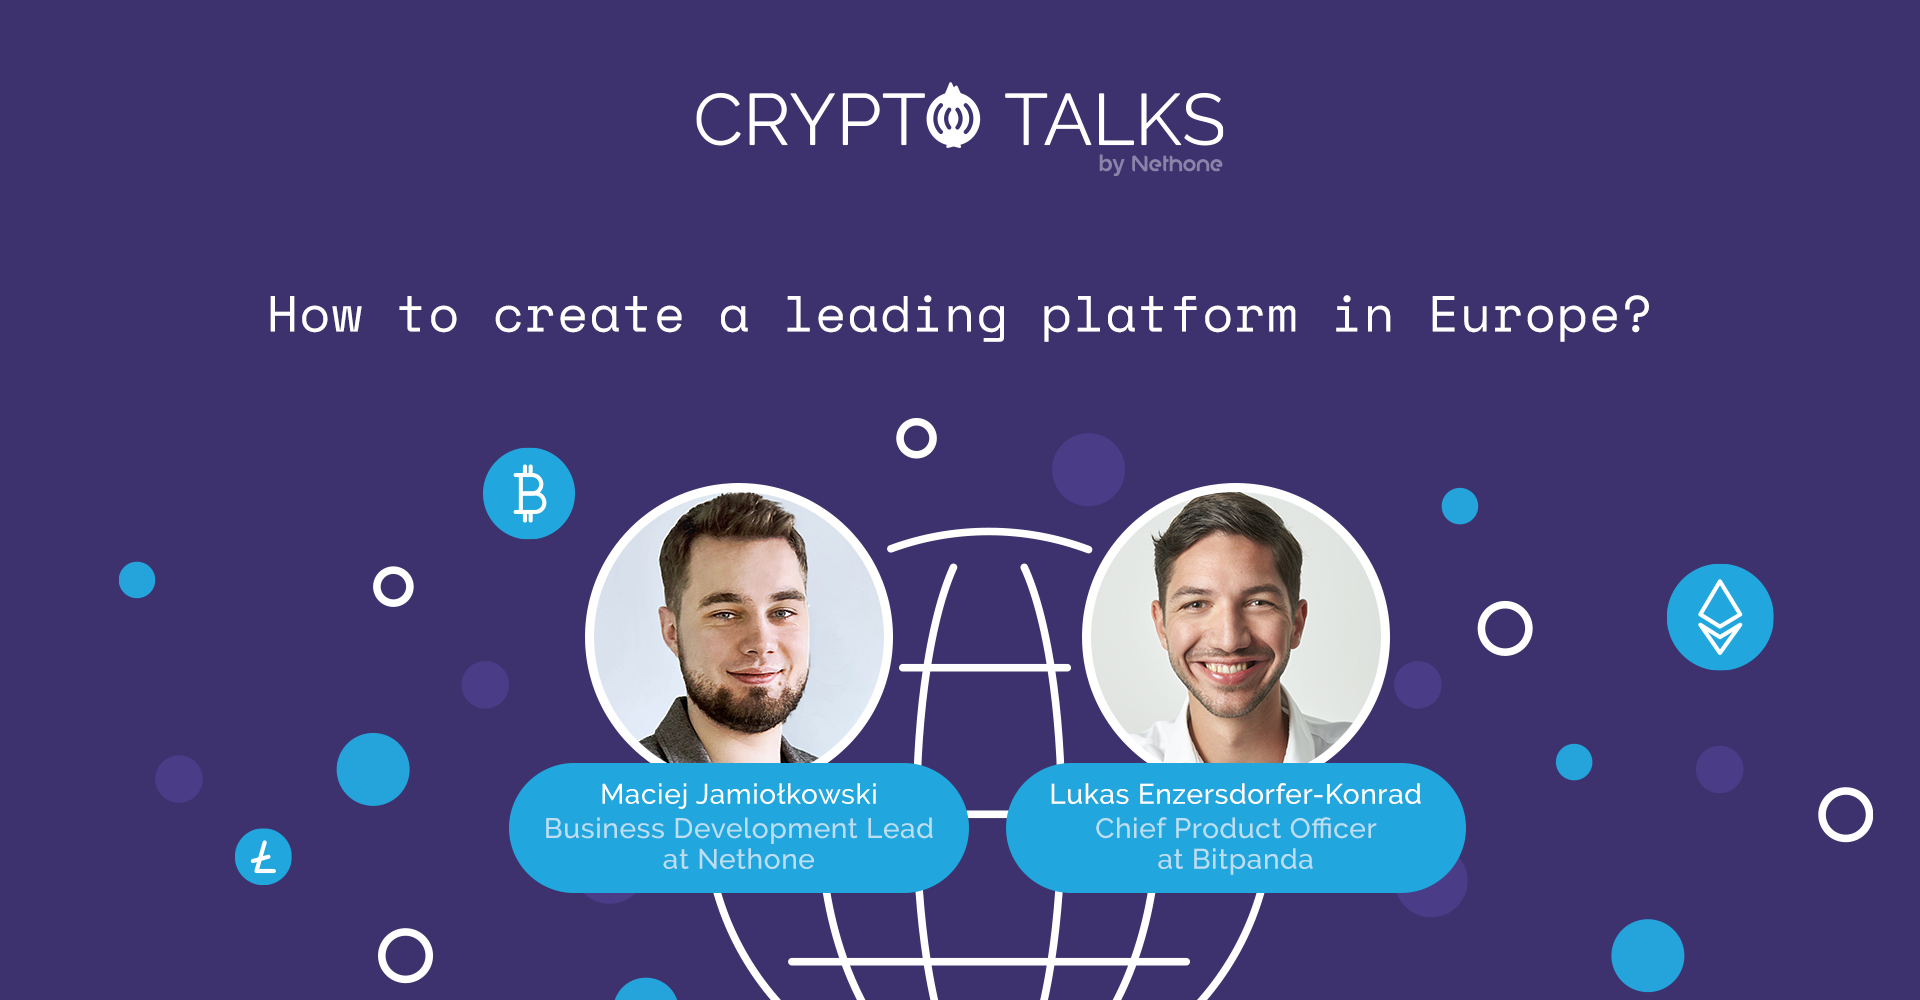 How to create a leading crypto platform in Europe